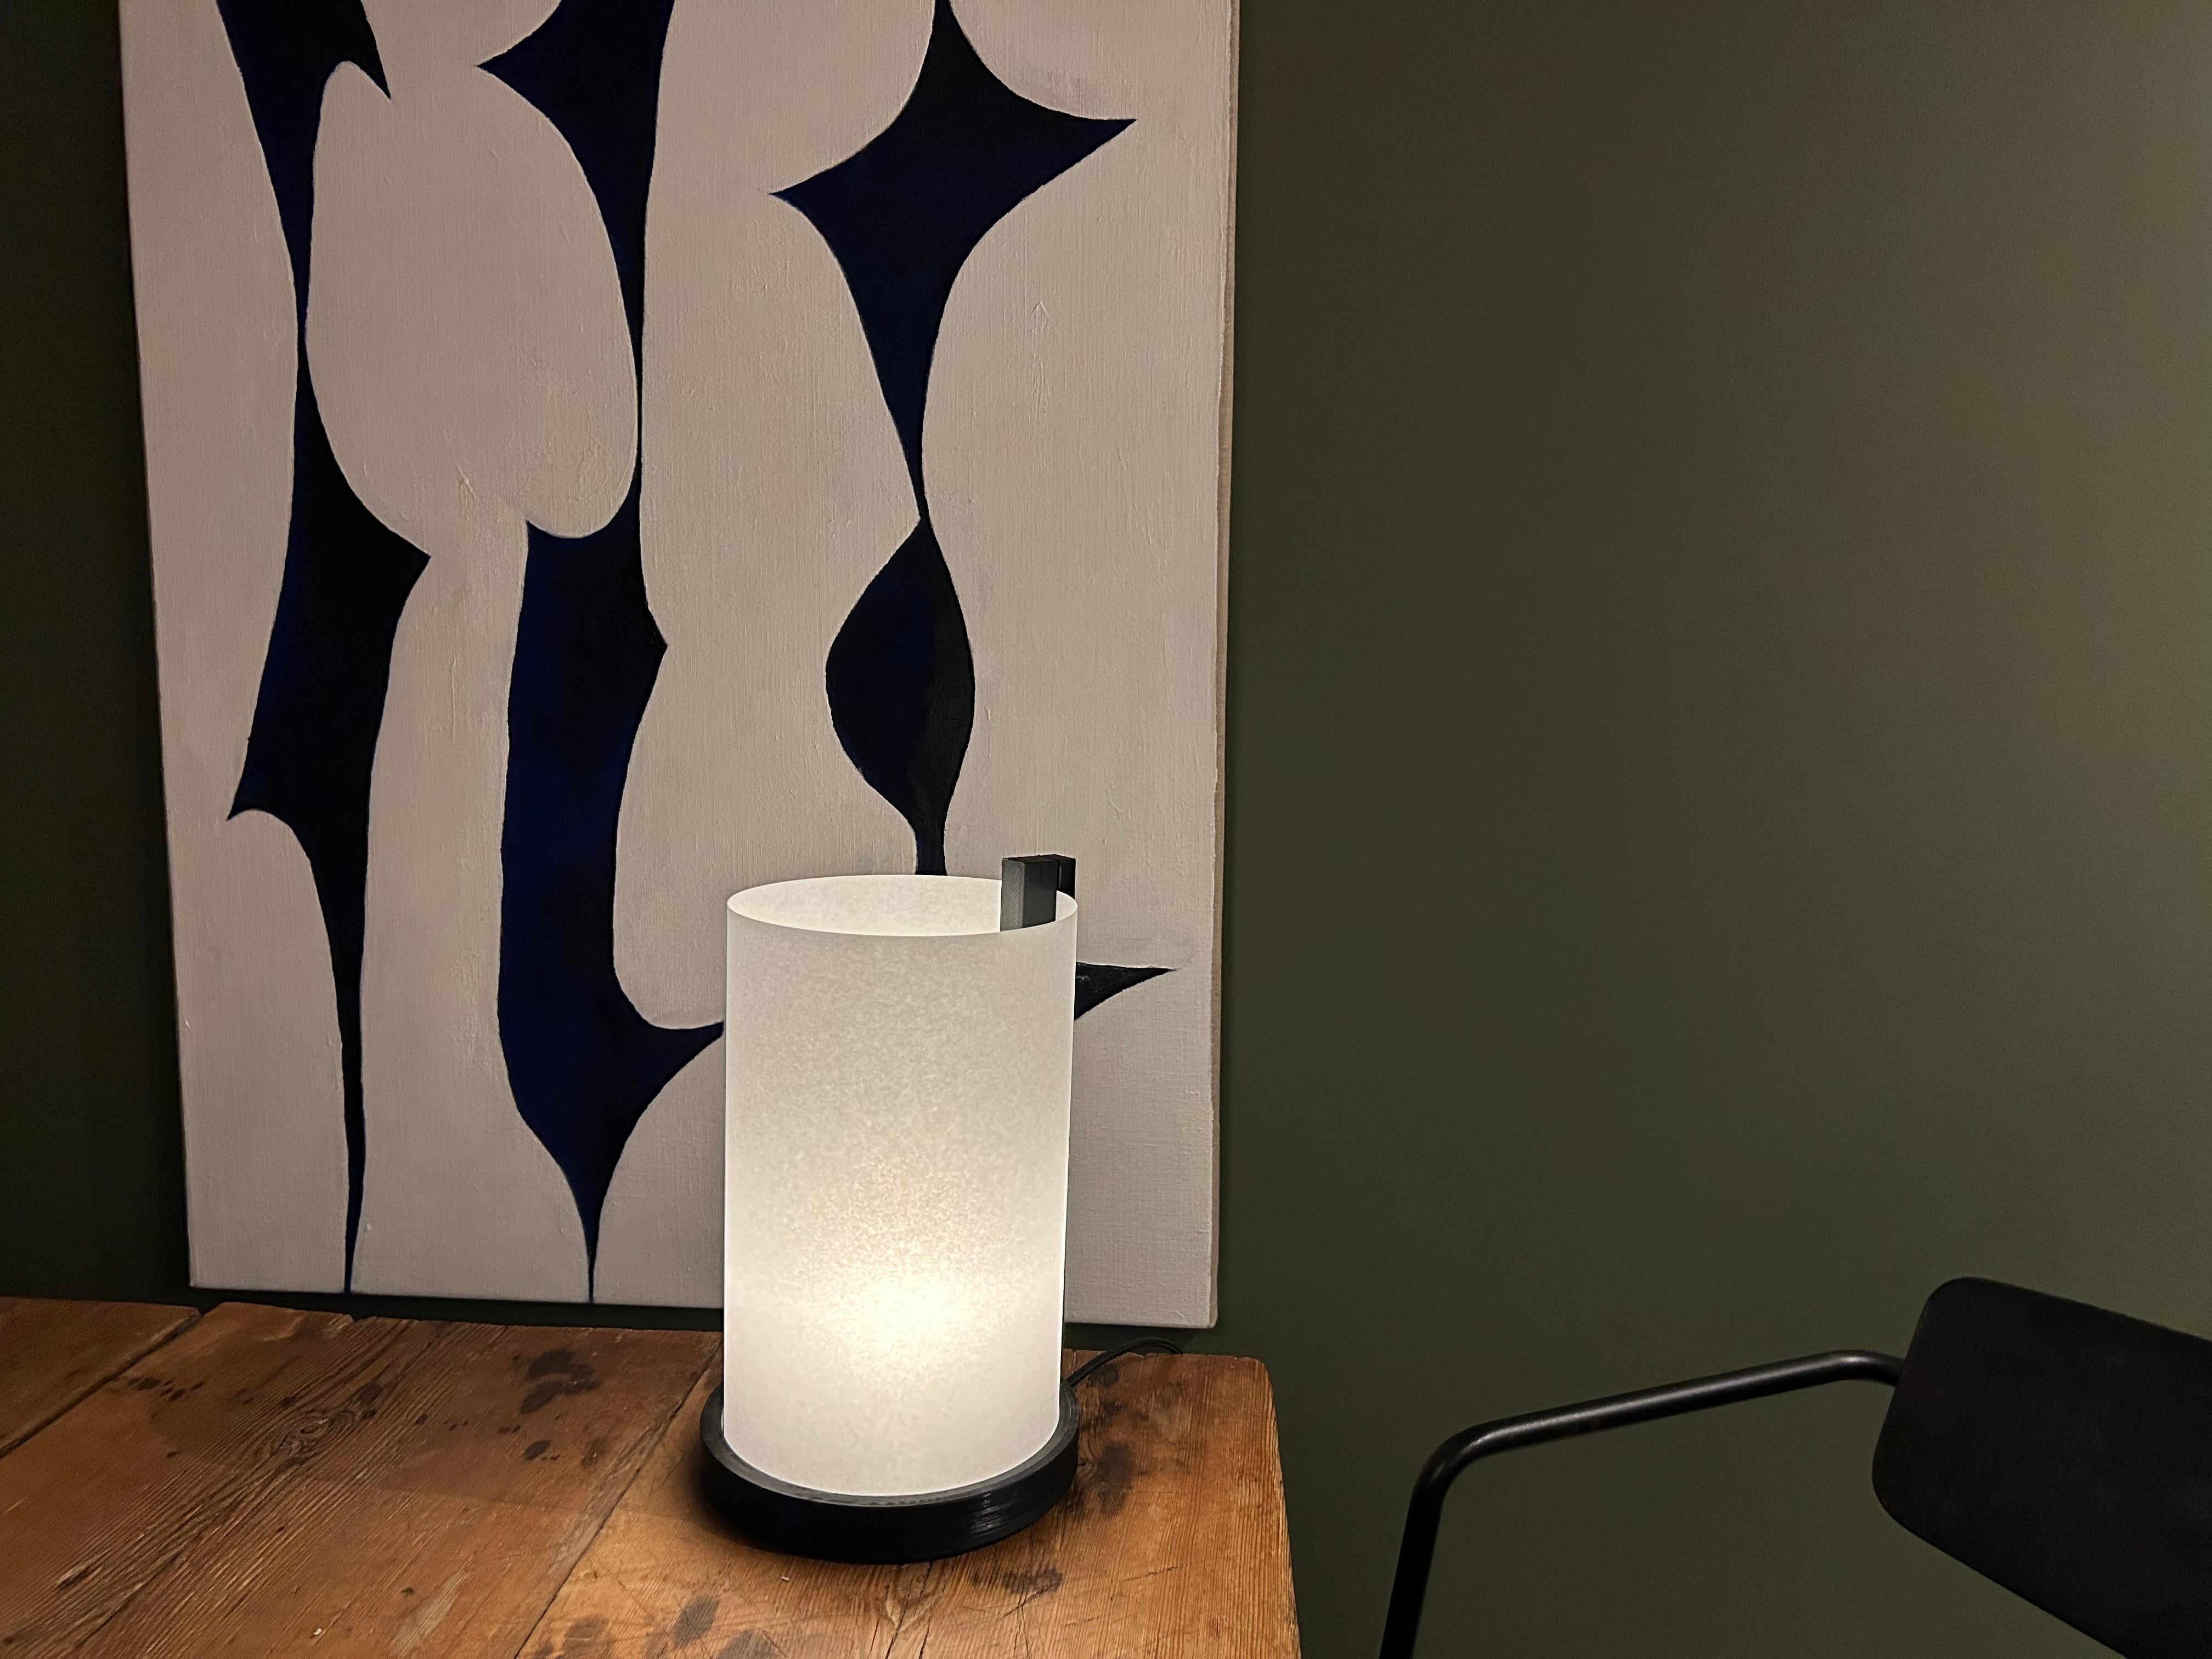 The ENSO table lamp is the new add-on to the ENSO pendant. ENSO is based on traditional Japanese wood joinery using the best materials and handcraft.

With a modern take on the traditional Japanese lanterns, the lamp shade is constructed with